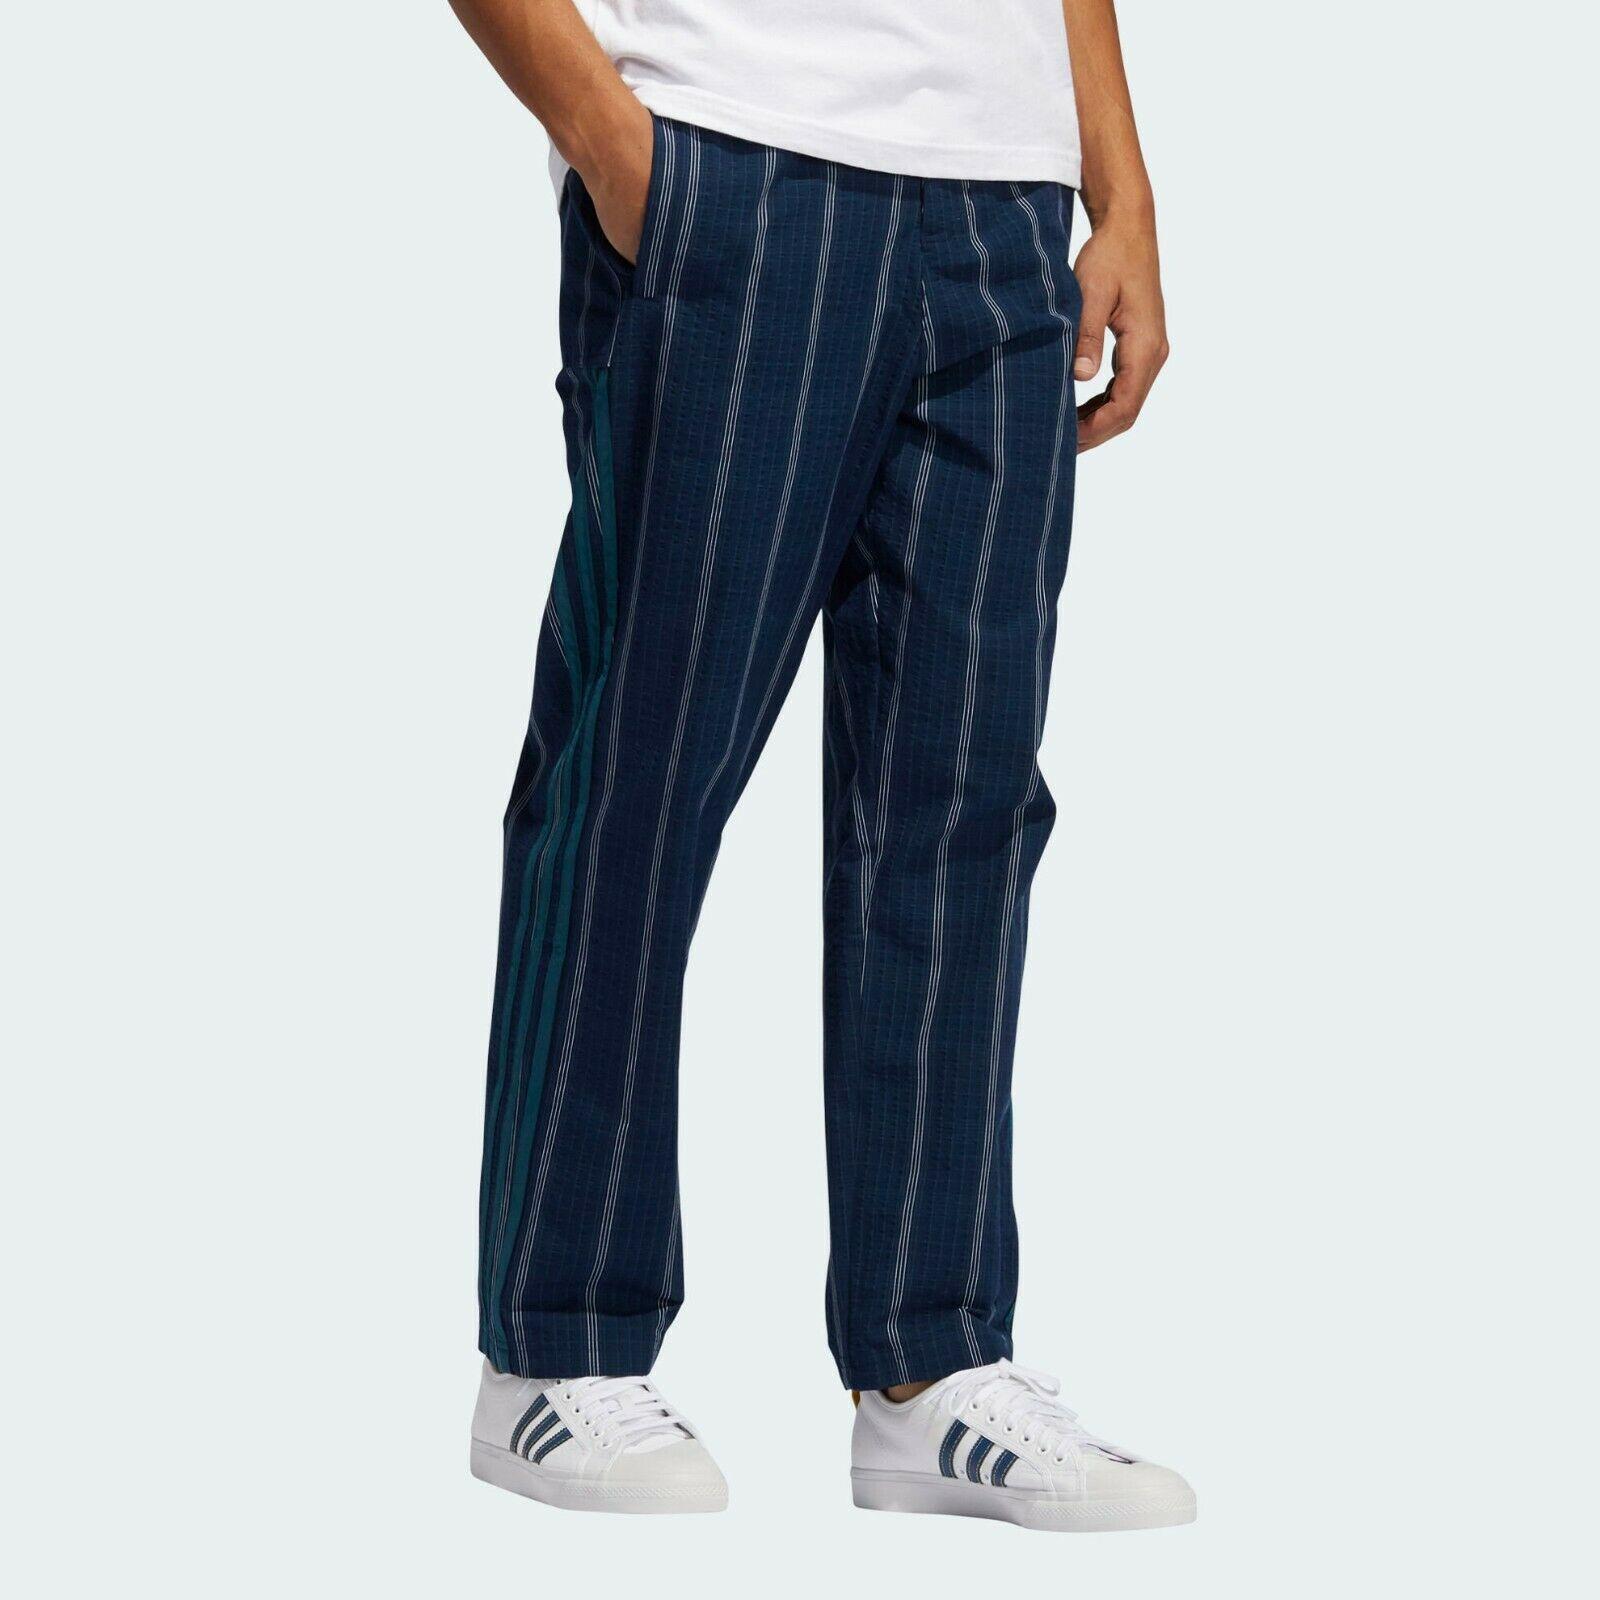 Adidas Men`s Sprt Collection MW Track Pants Collegiate Navy Size: Large